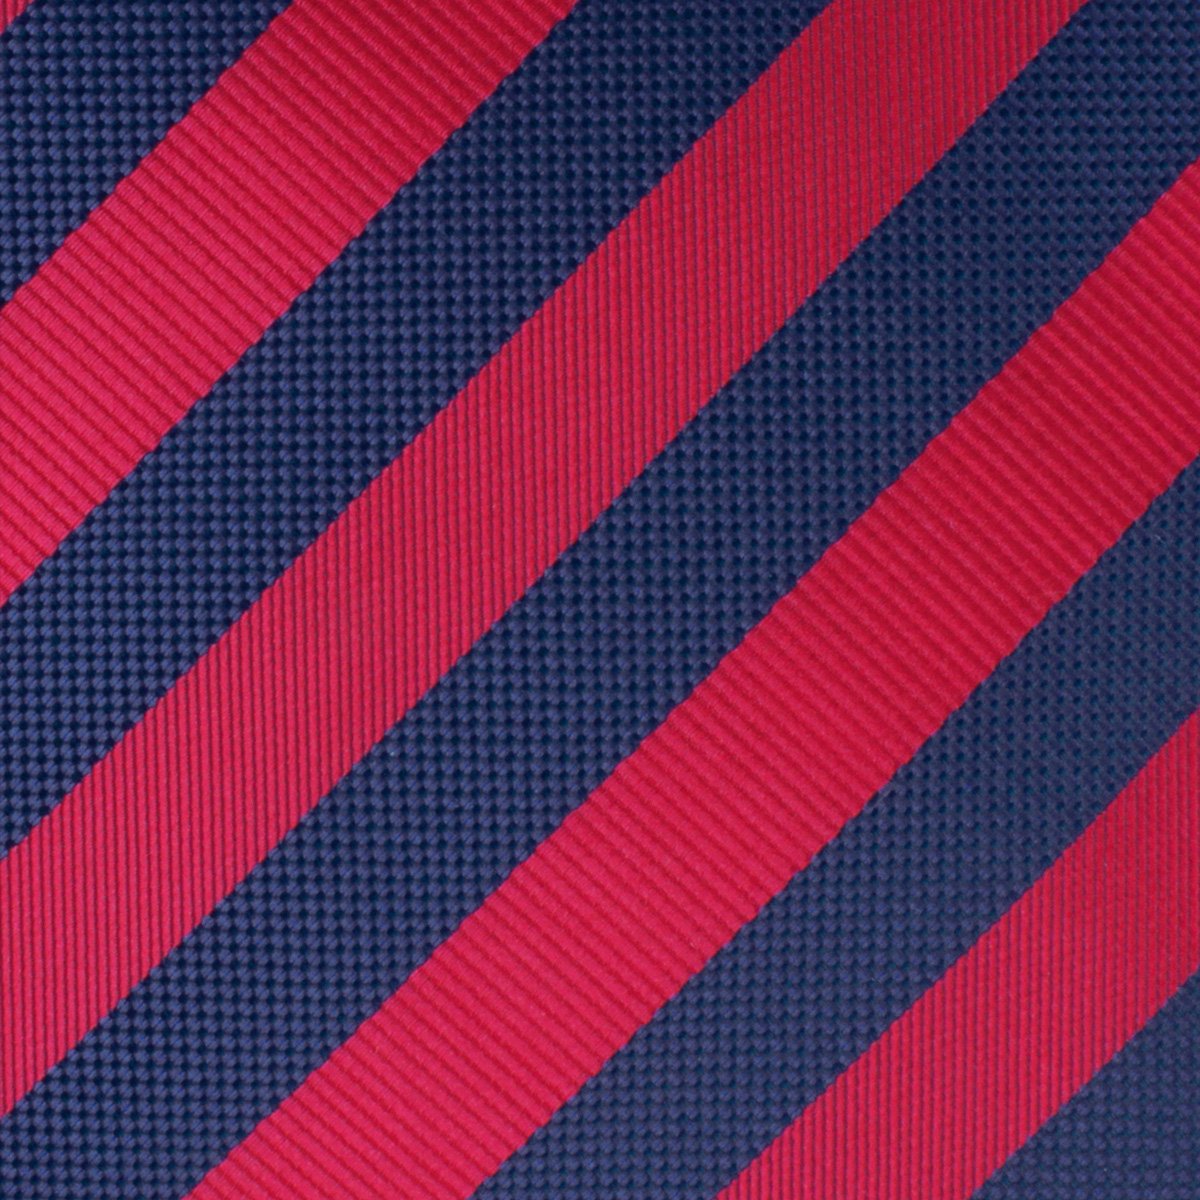 Canterbury Red & Navy Blue Striped Pocket Square Fabric